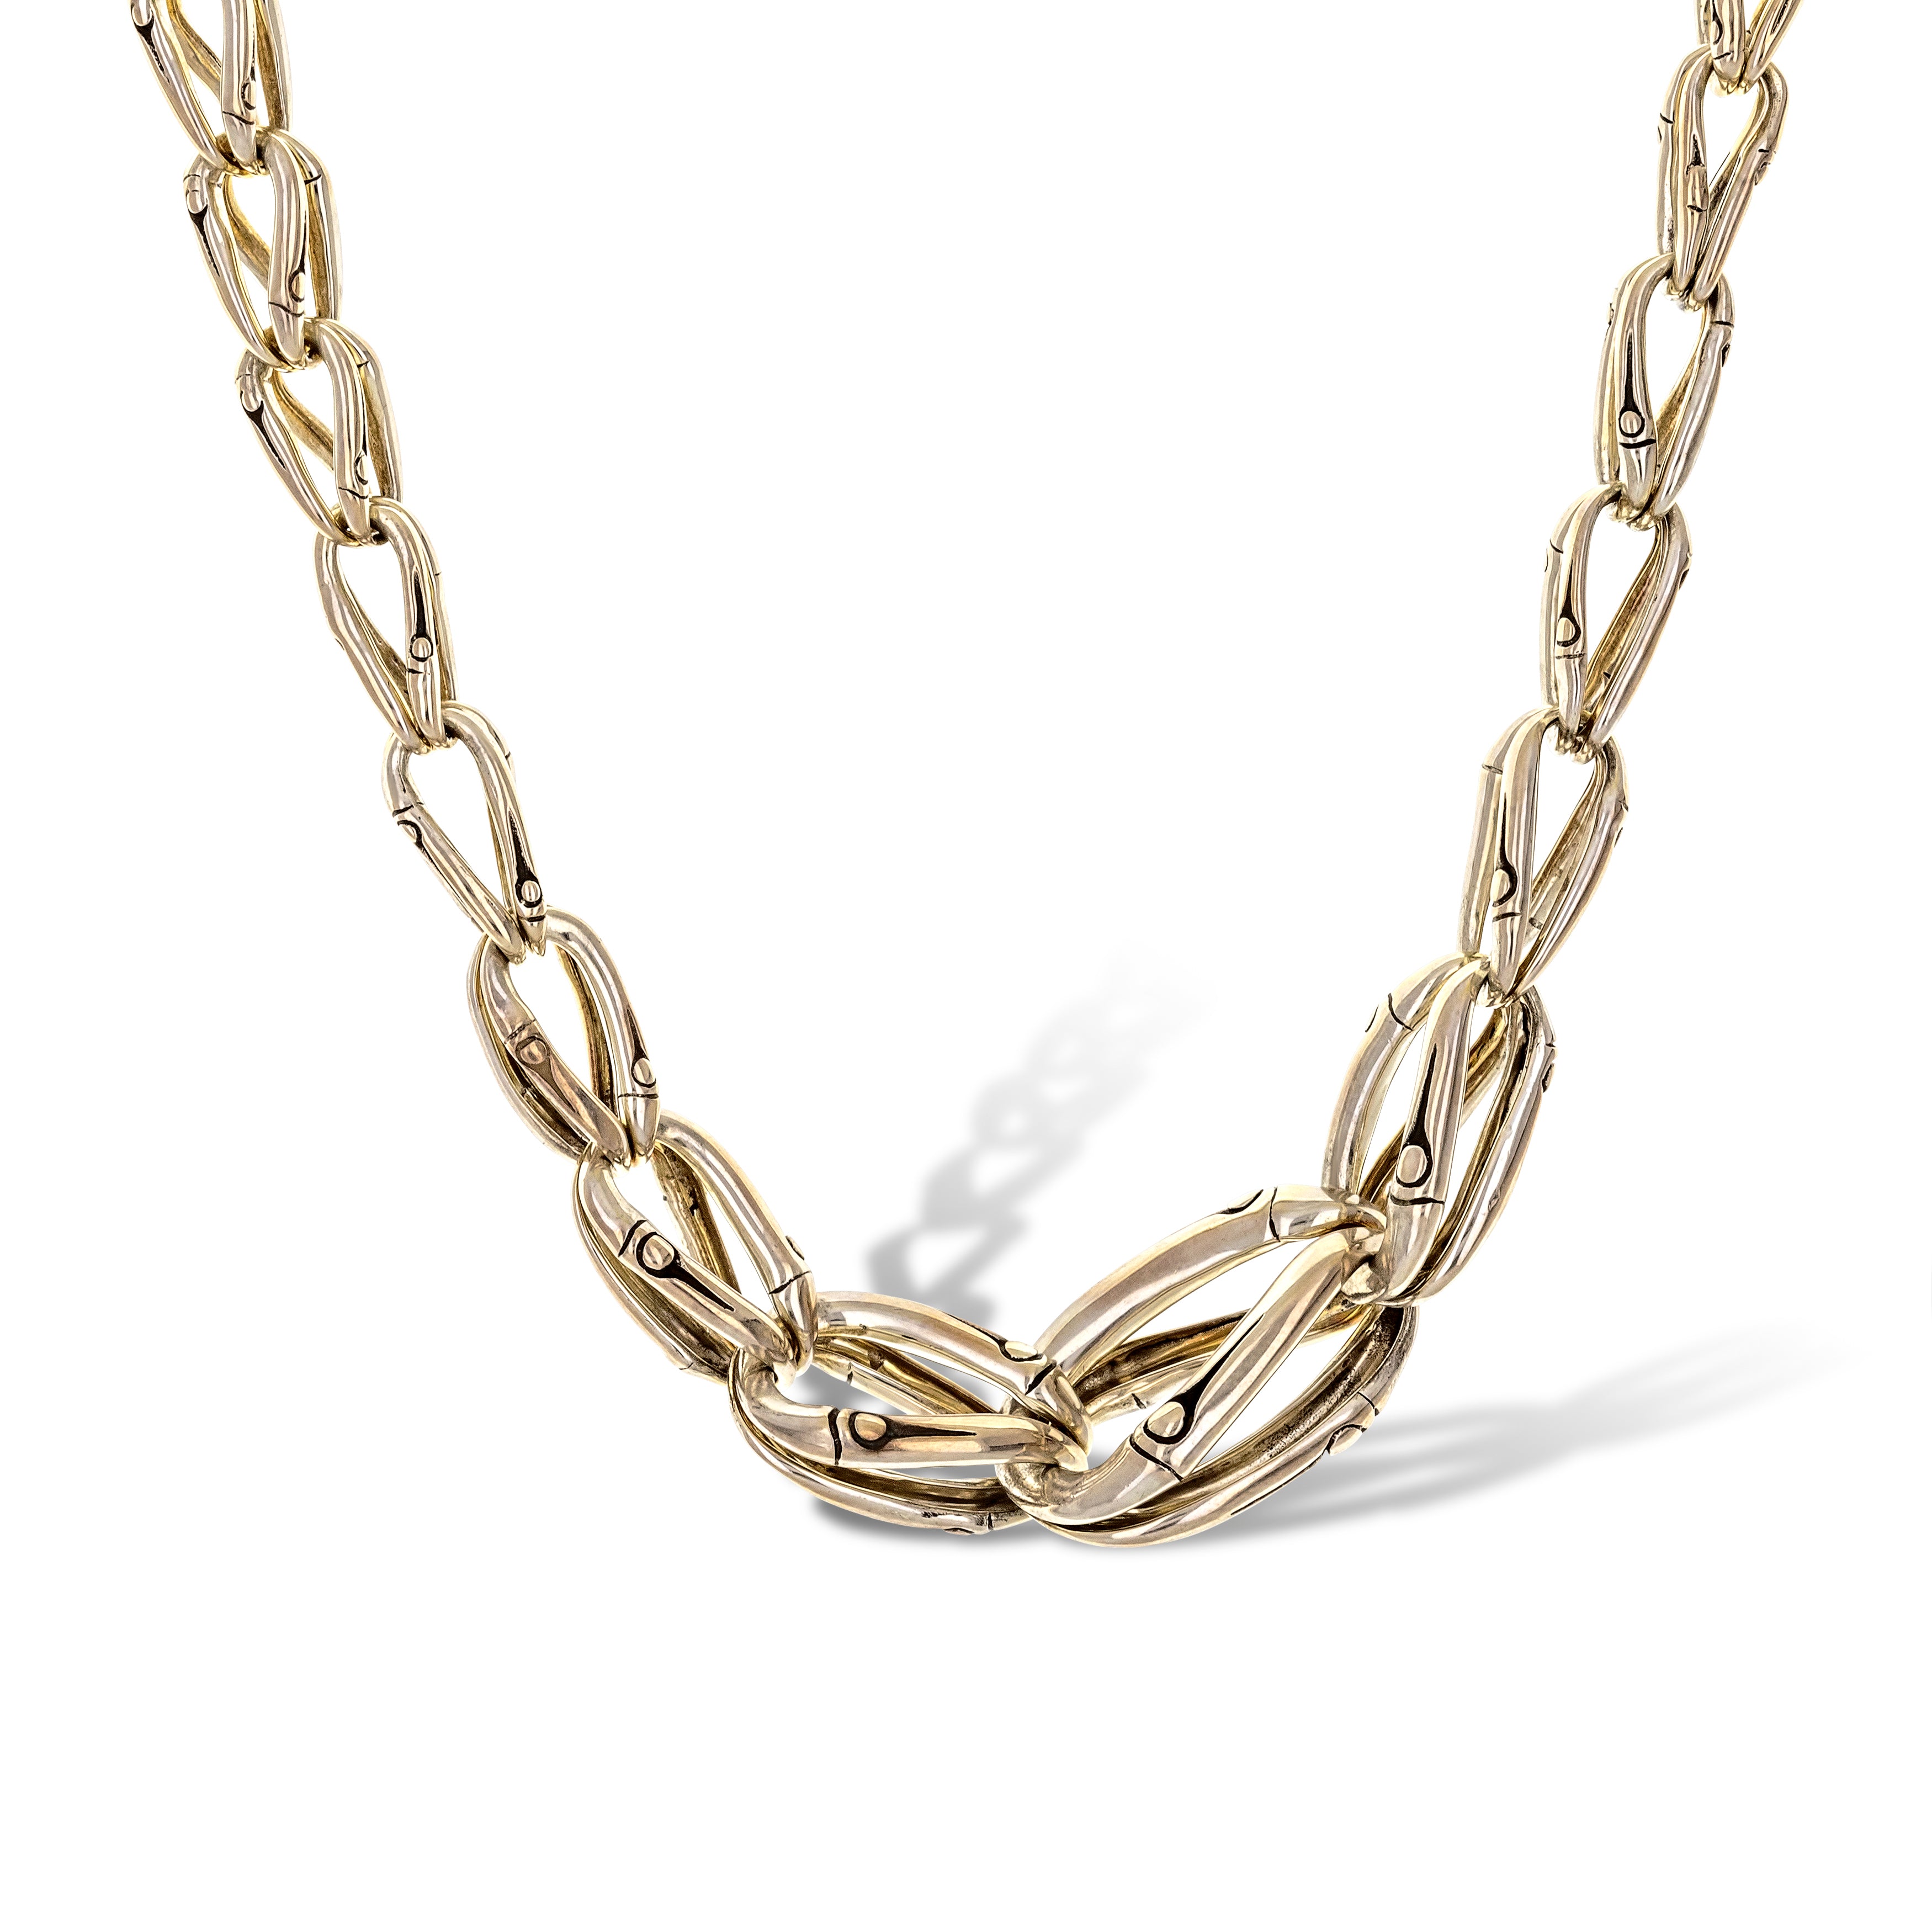 Silver Women's Bamboo Necklace